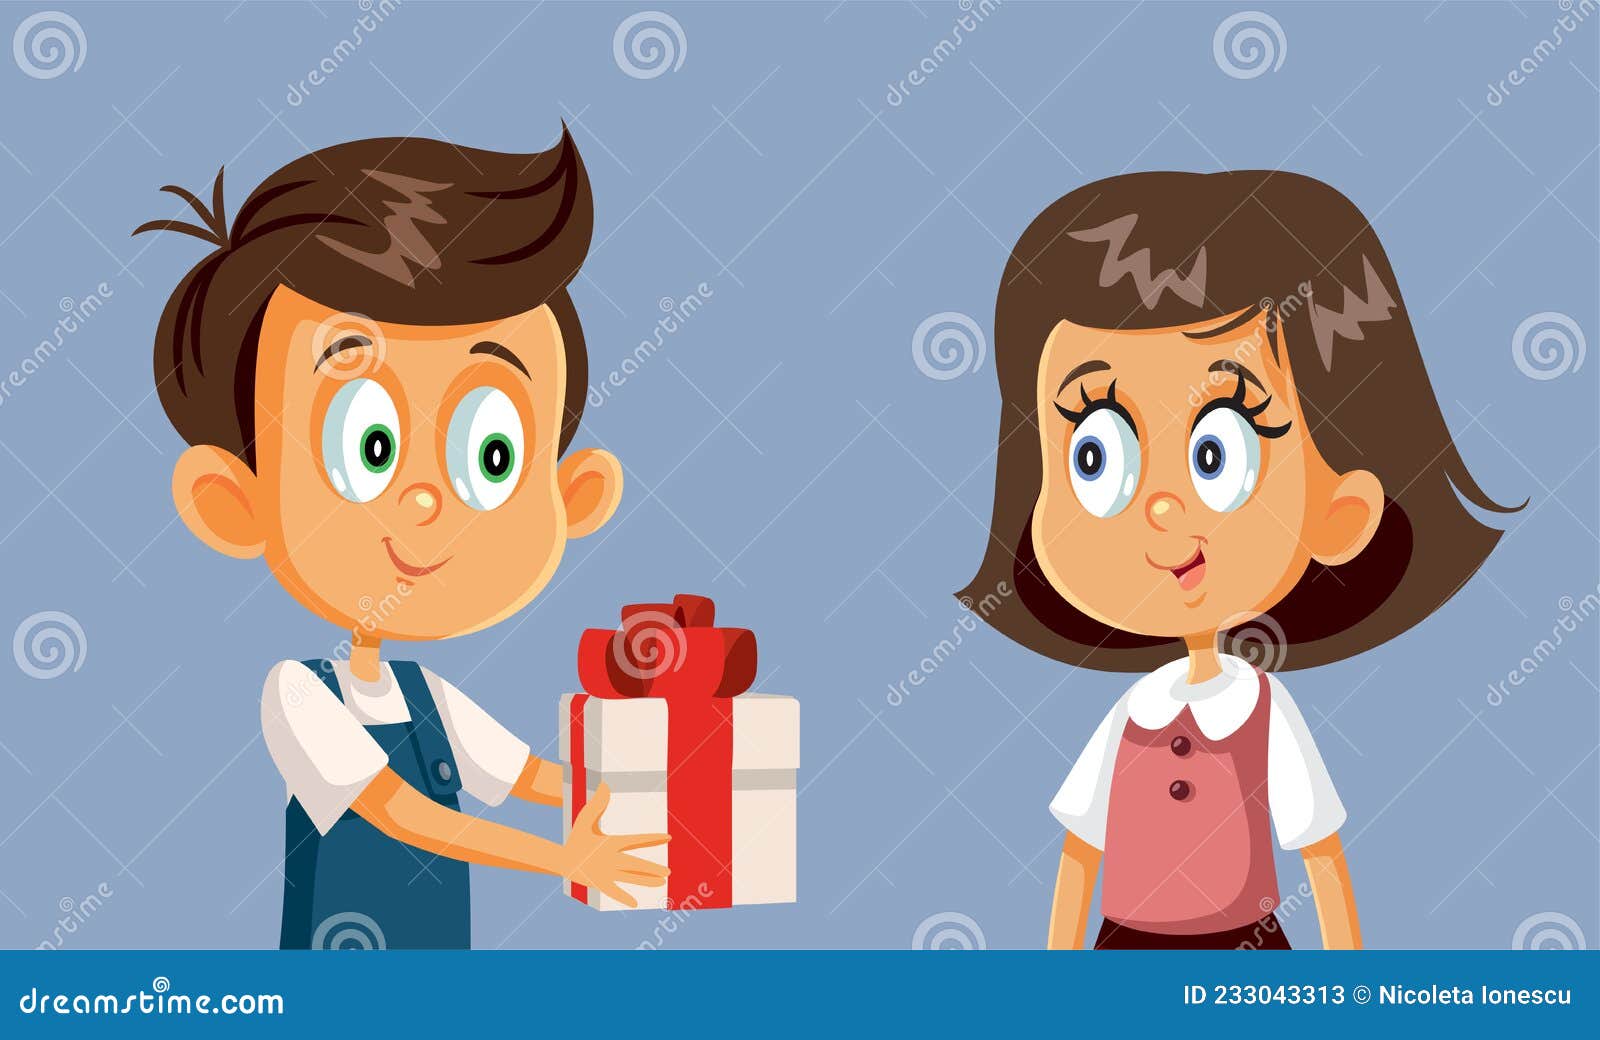 giving gifts cartoon